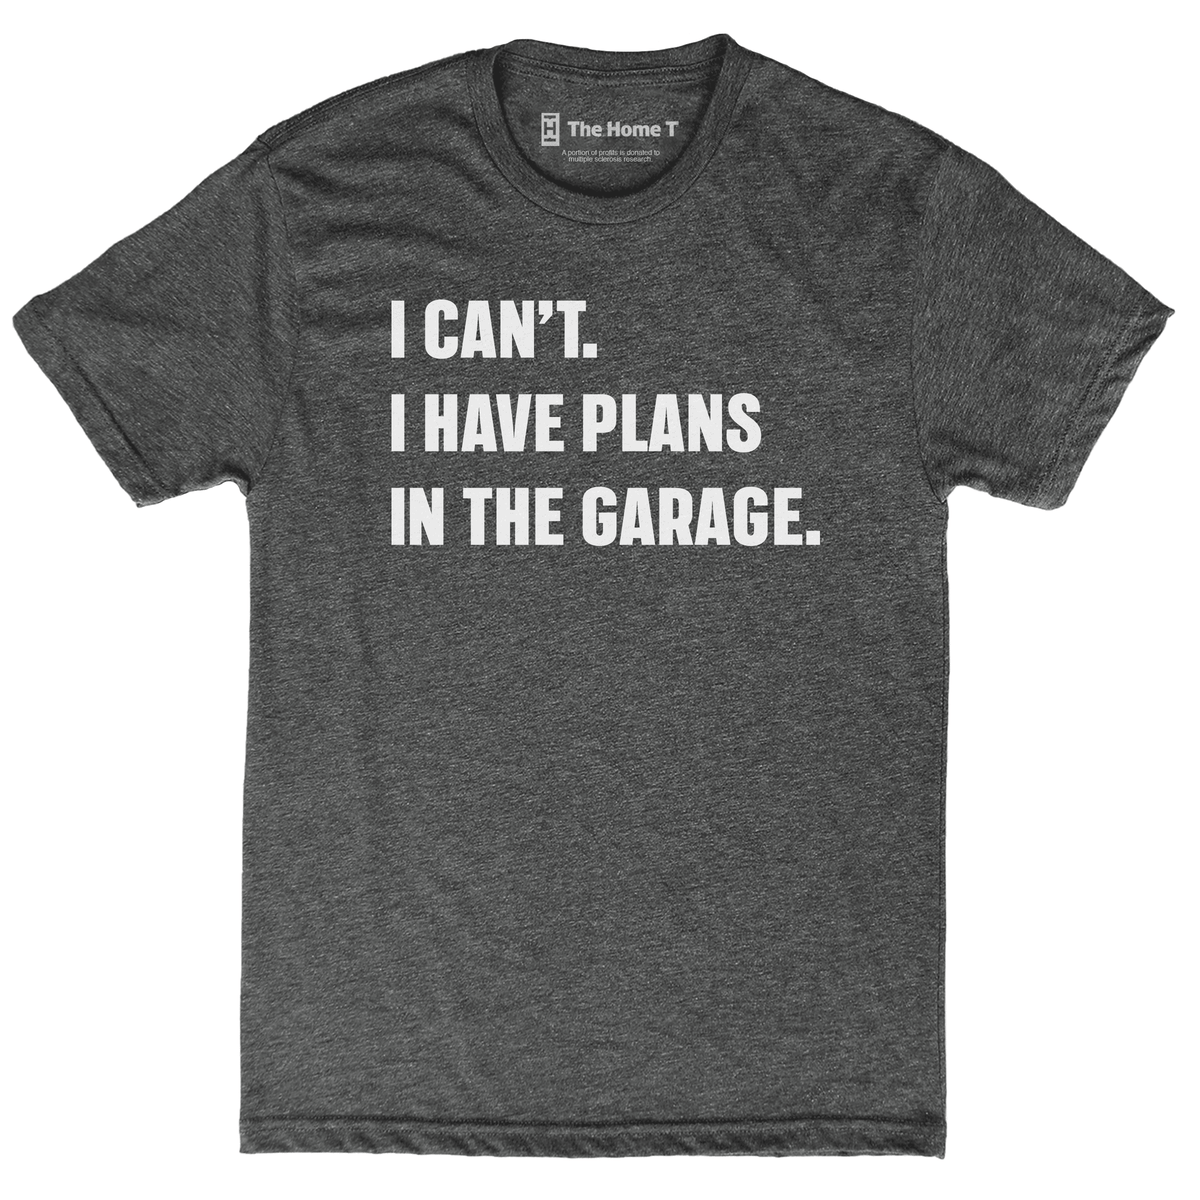 I Have Plans in the Garage